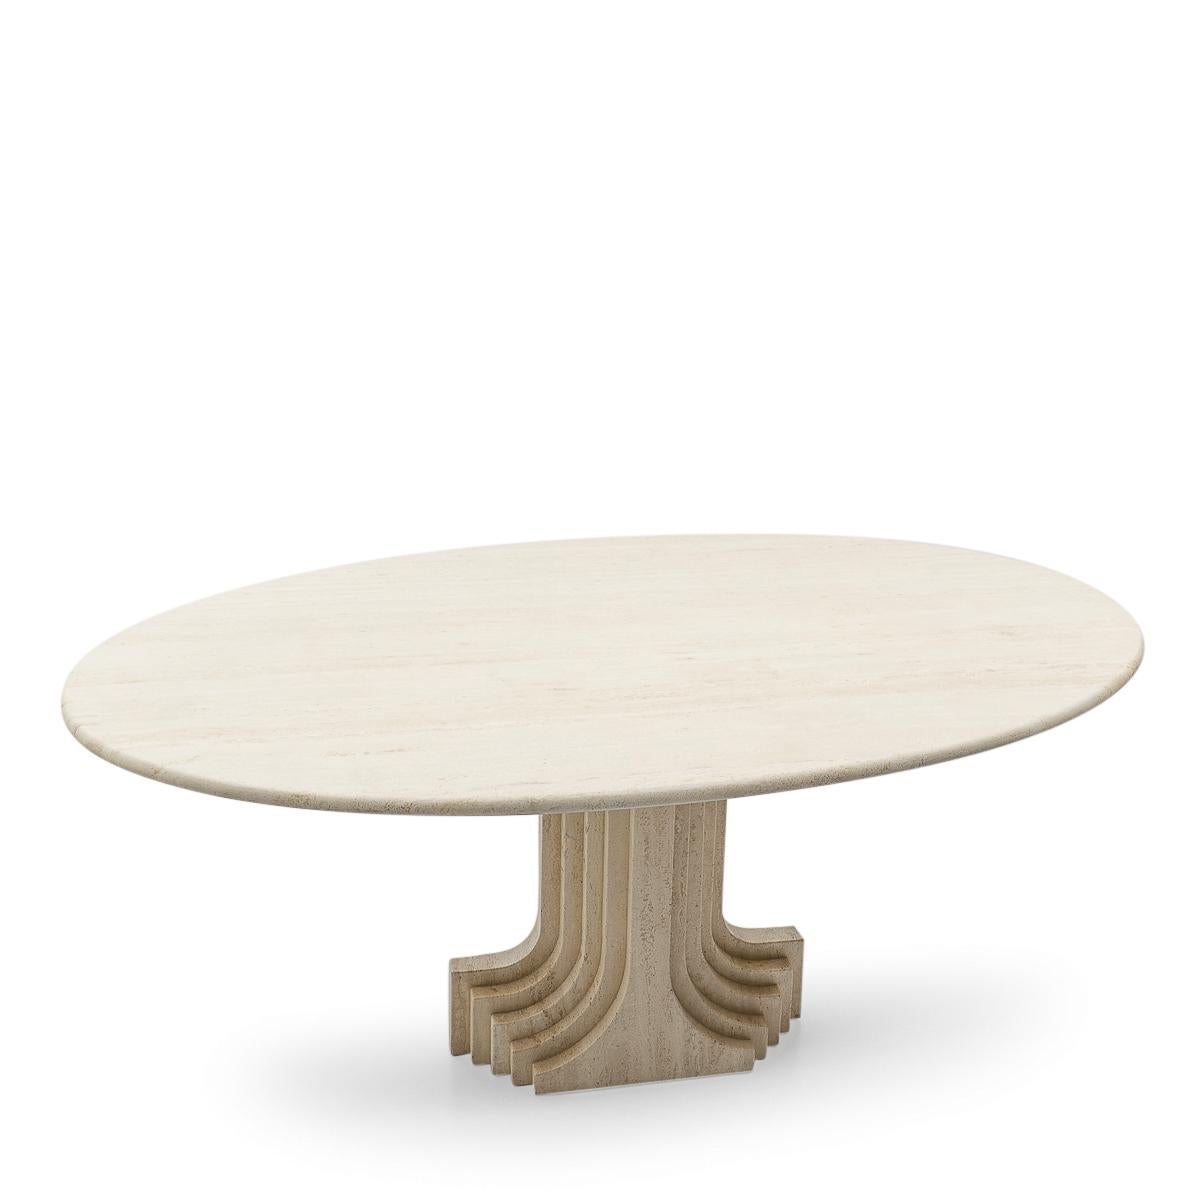 Italian Sculptural Carlo Scarpa Travertine Dining Table, by Cattelan Italia, 1970s For Sale